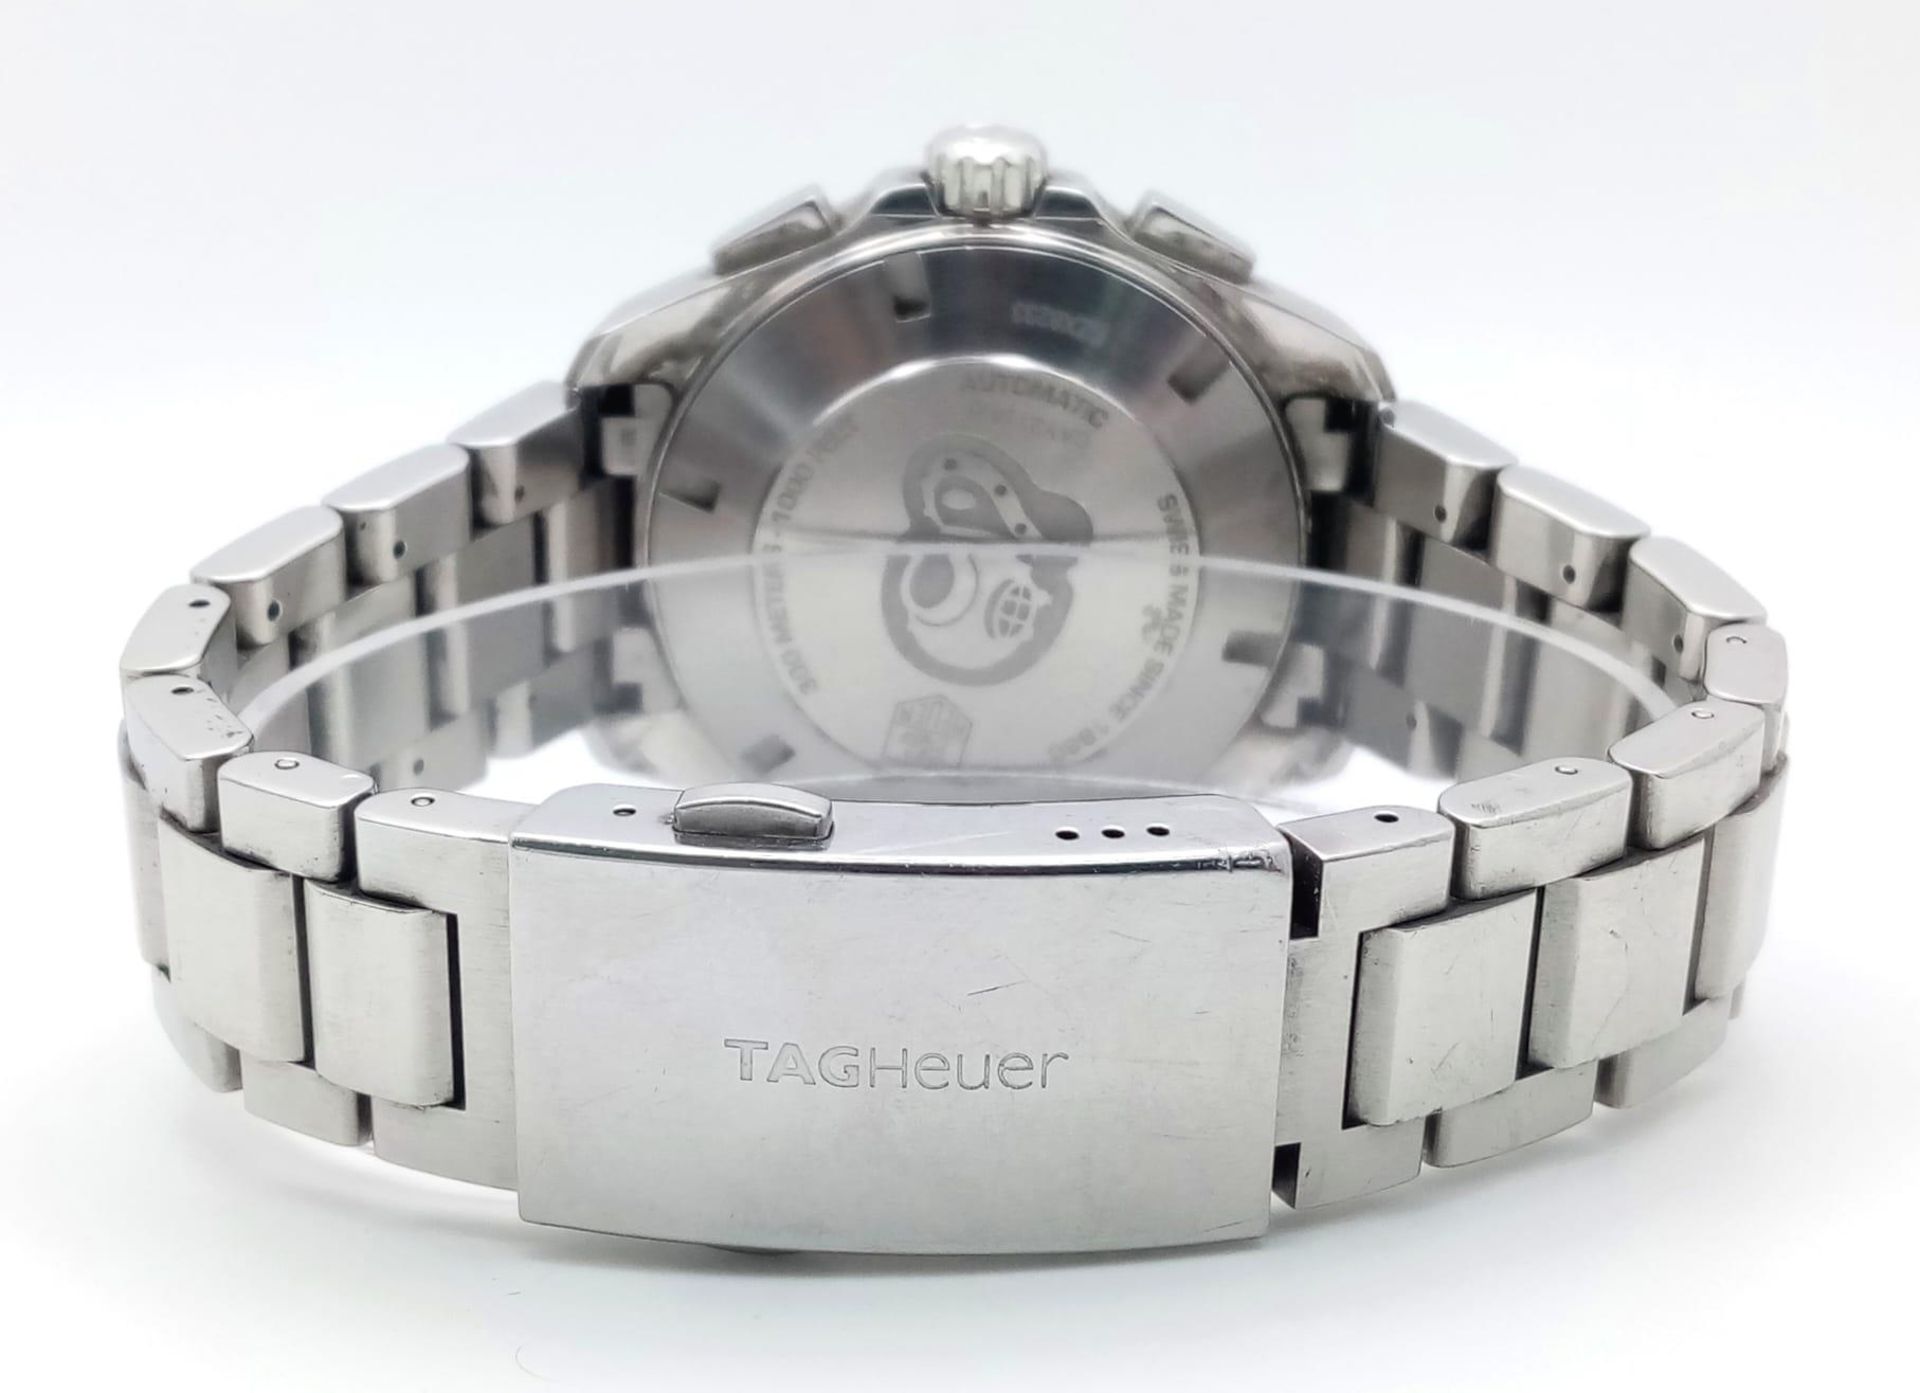 A Tag Heuer Automatic Aquaracer Gents Watch. Stainless steel bracelet and case - 44mm. Black dial - Bild 5 aus 8